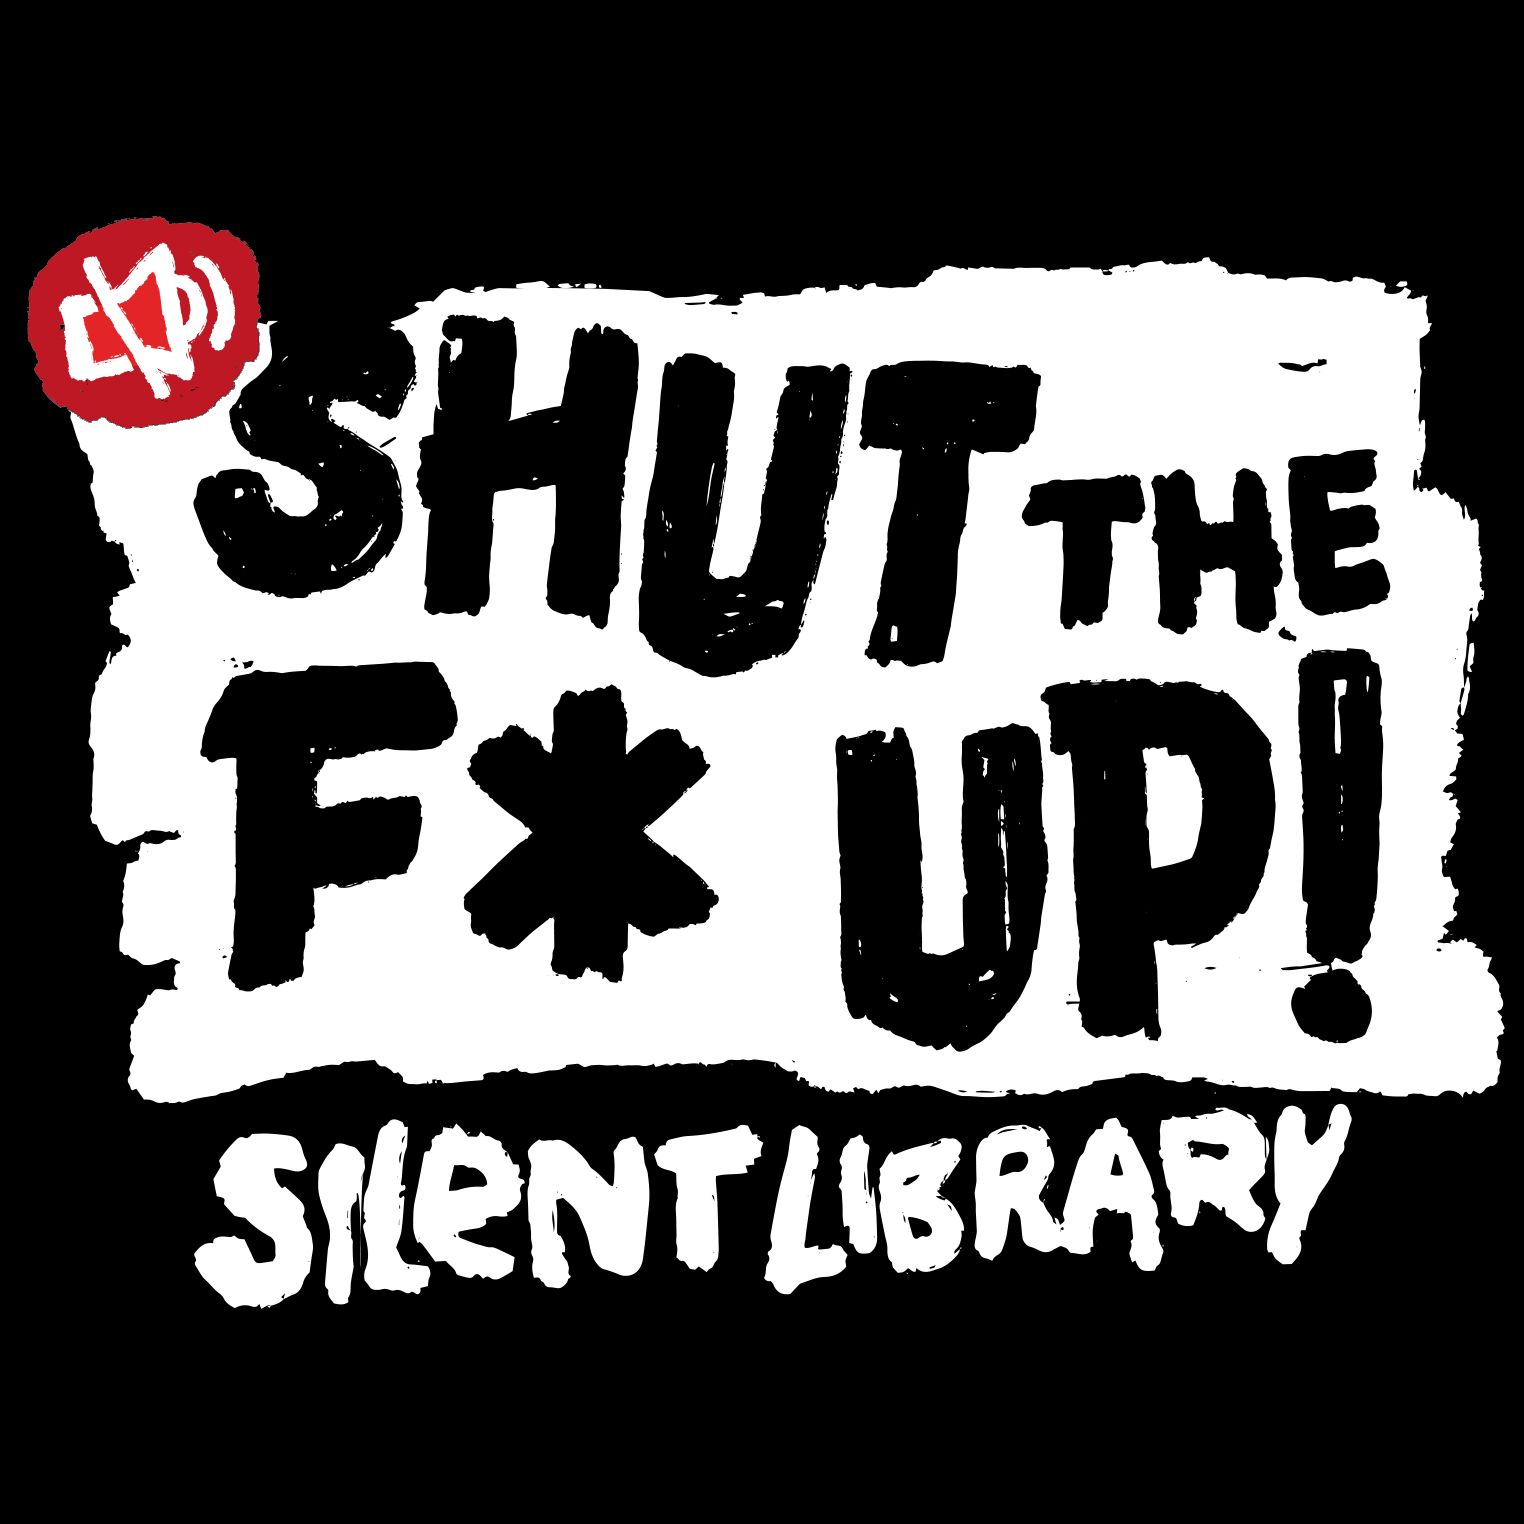 https://images.plus.rtl.de/watch/984811/artwork_square/34-4o-s0-29/shut-the-f-up-silent-library